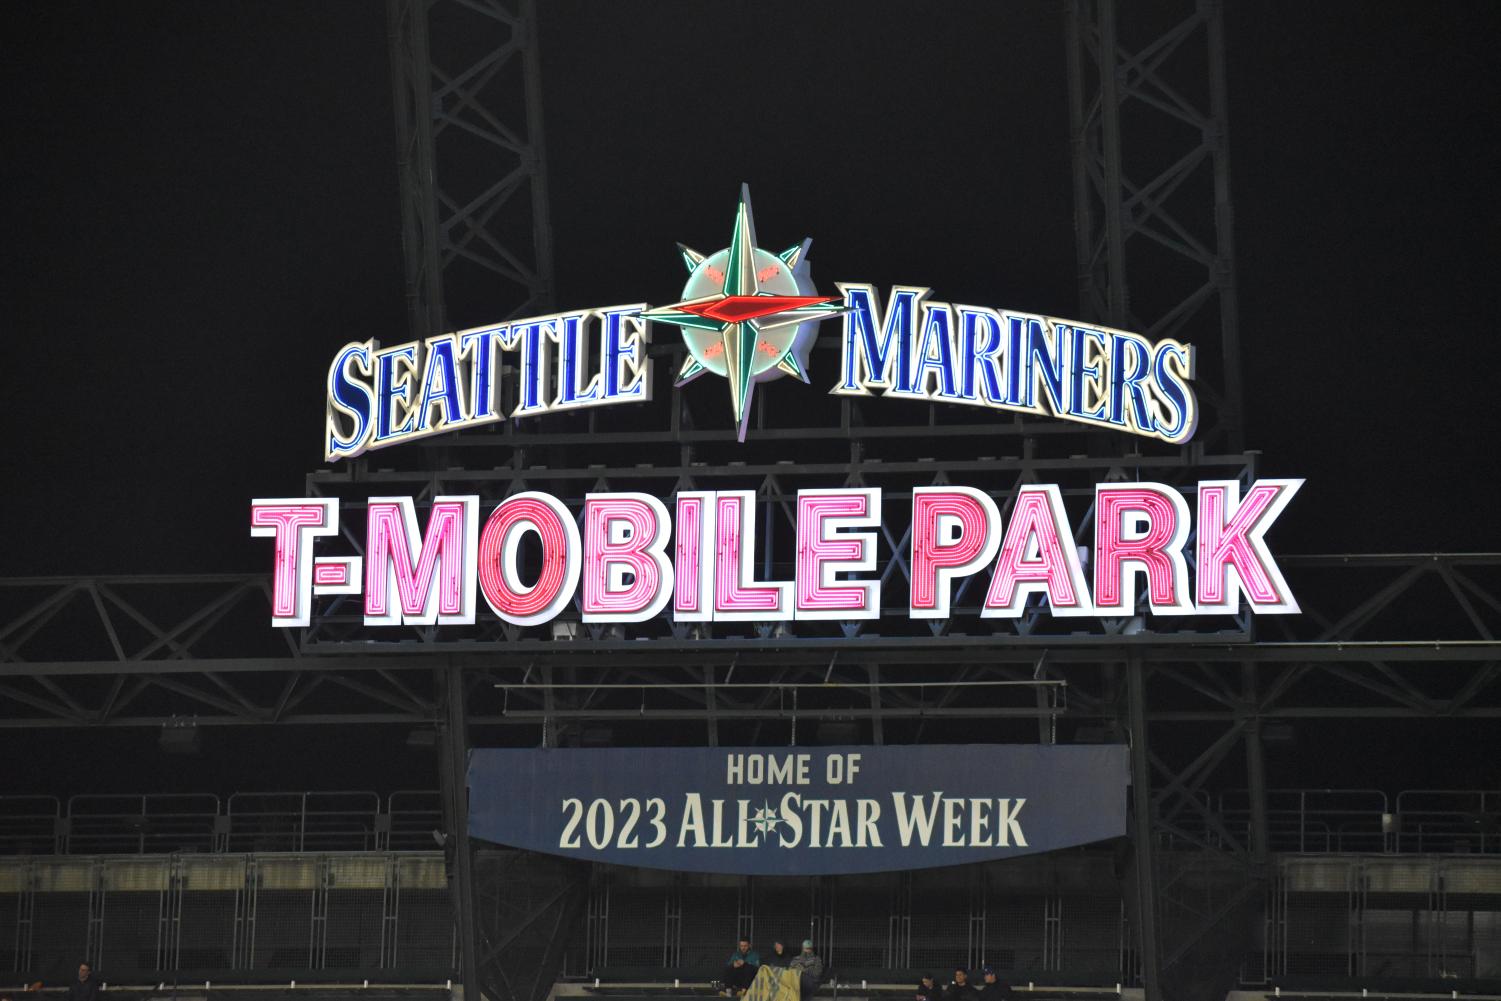 Seattle+Mariners+welcome+the+Wildcats+to+T-Mobile+Park